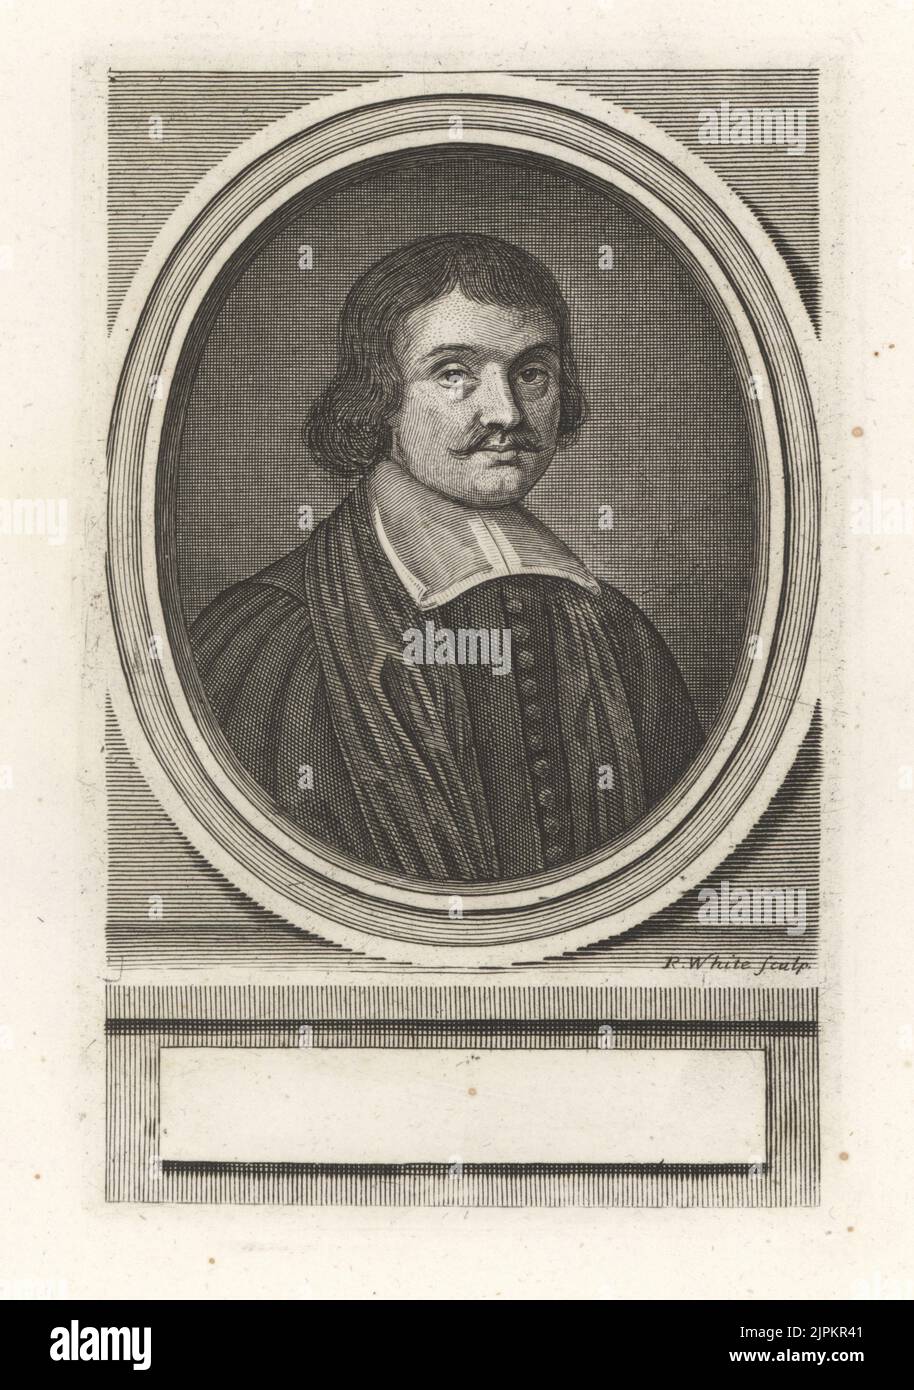 Robert Leighton, Bishop of Glasgow, Scottish prelate and scholar,  1611-1684. In plain collar and ecclesiastical robes. Original plate by Robert White. Copperplate engraving from Samuel Woodburn’s Gallery of Rare Portraits Consisting of Original Plates, George Jones, 102 St Martin’s Lane, London, 1816. Stock Photo